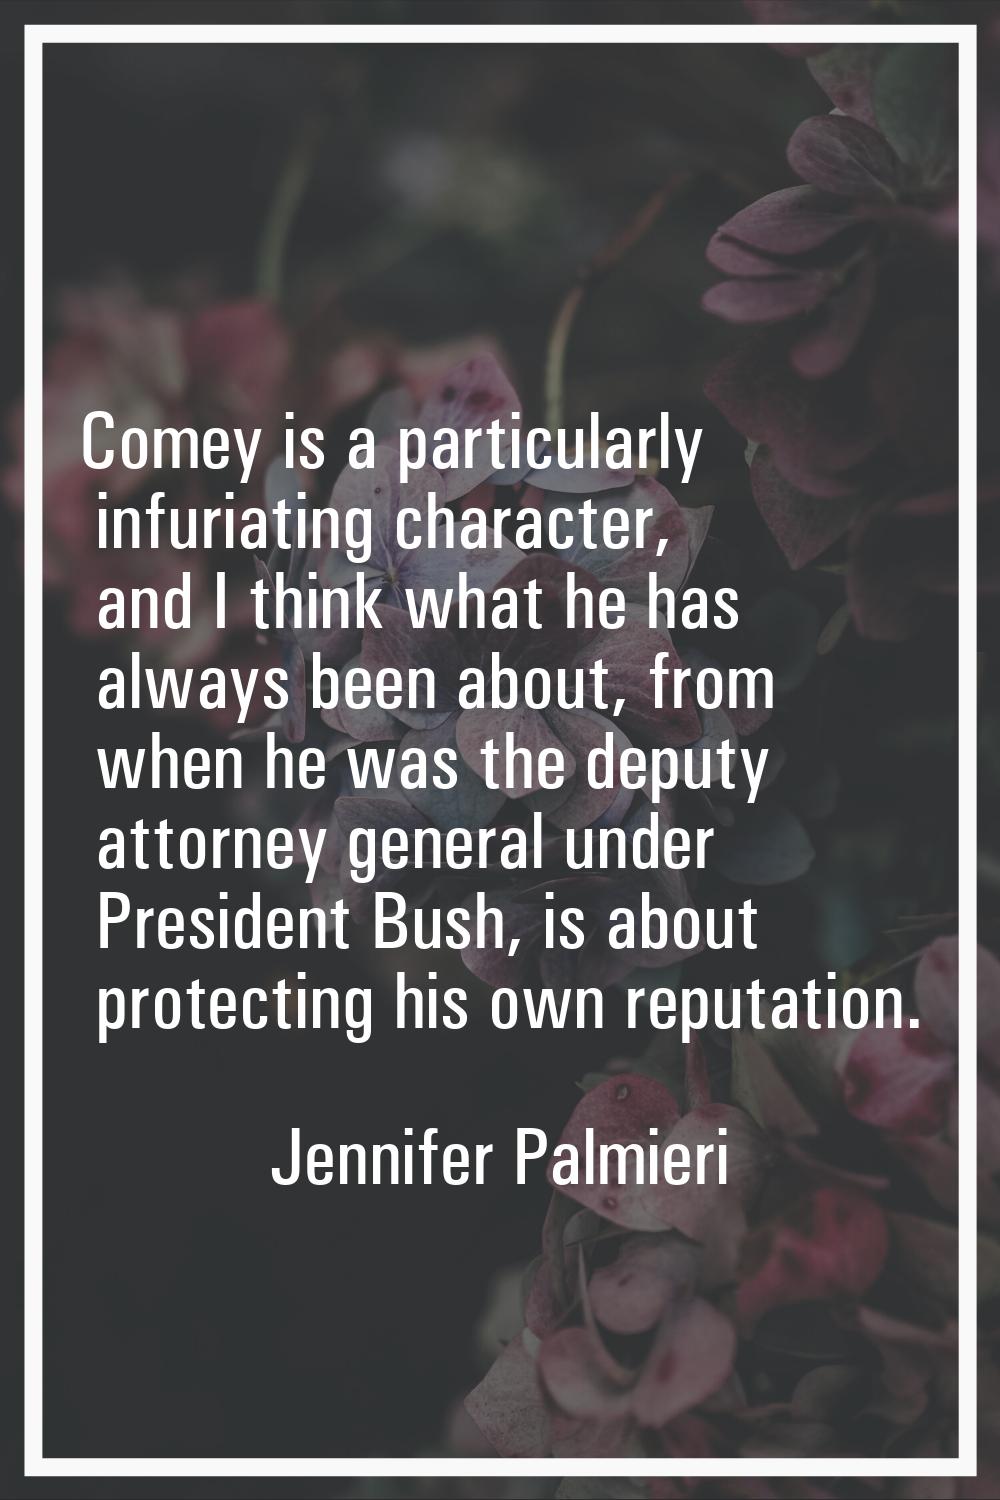 Comey is a particularly infuriating character, and I think what he has always been about, from when